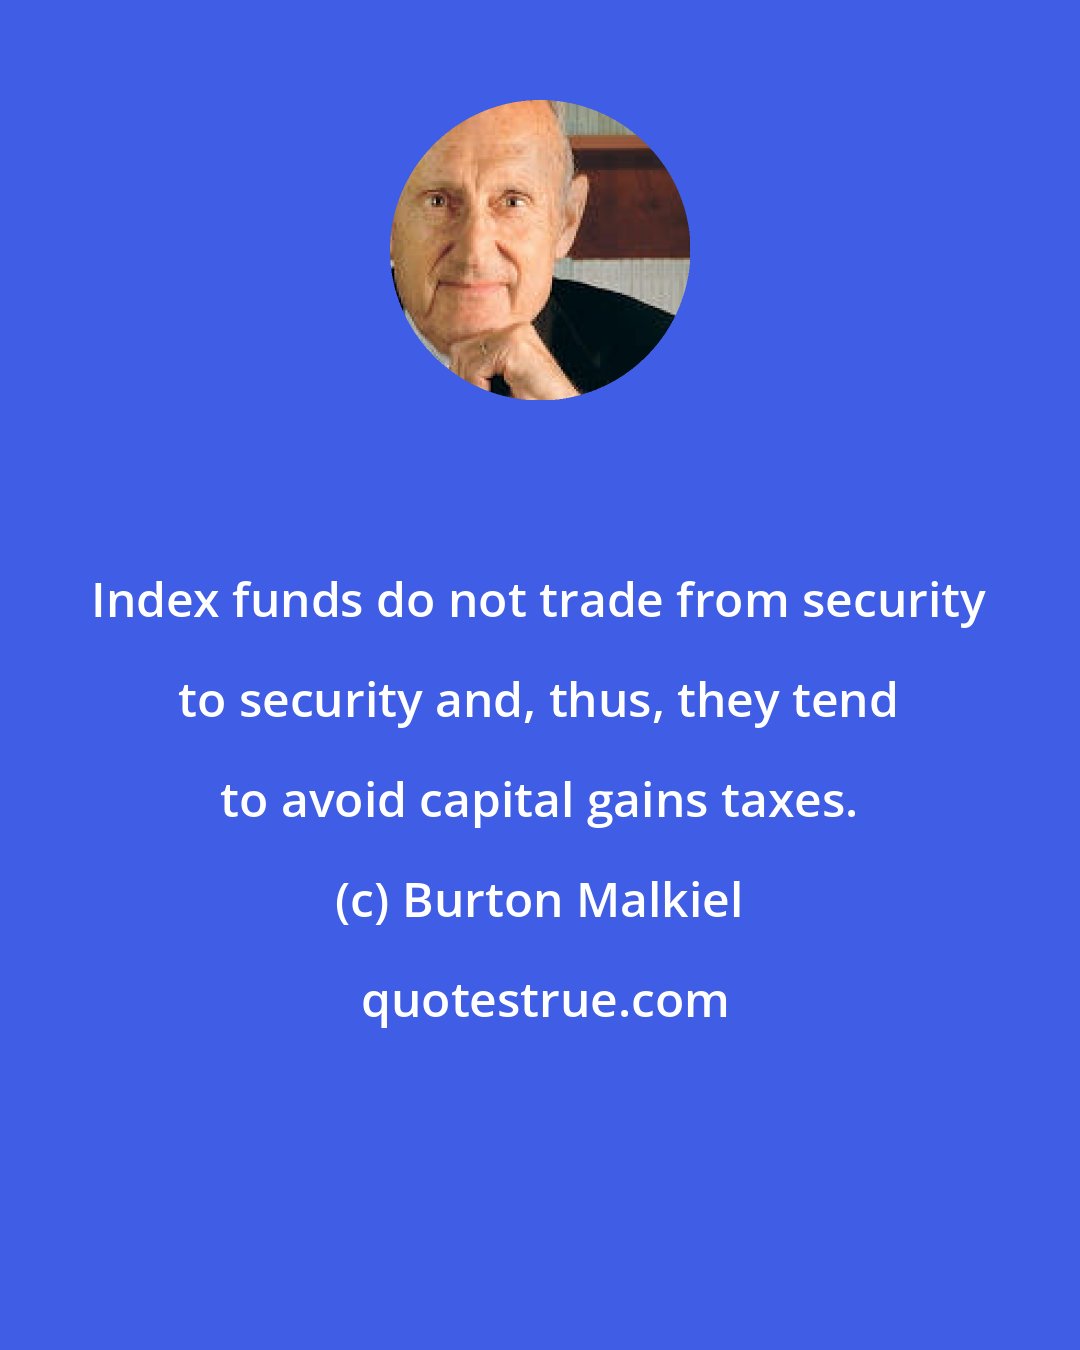 Burton Malkiel: Index funds do not trade from security to security and, thus, they tend to avoid capital gains taxes.